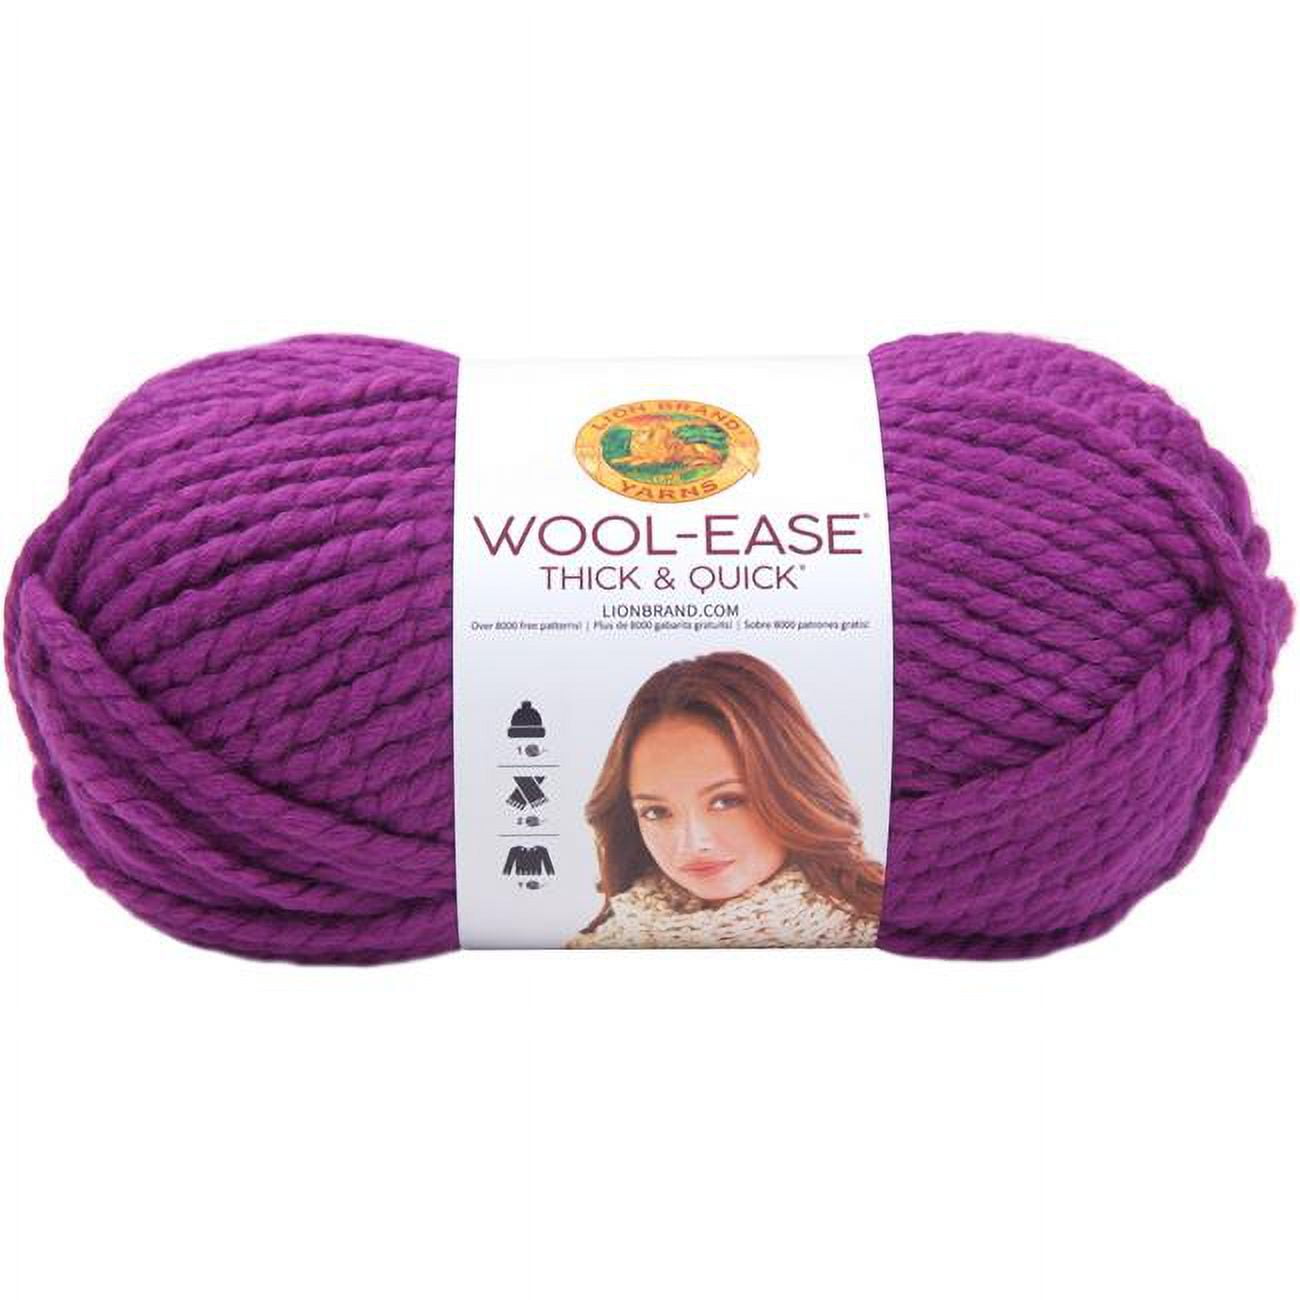 Lion Brand® Wool-Ease® Thick and Quick Yarn - Barley, 6 oz - Pay